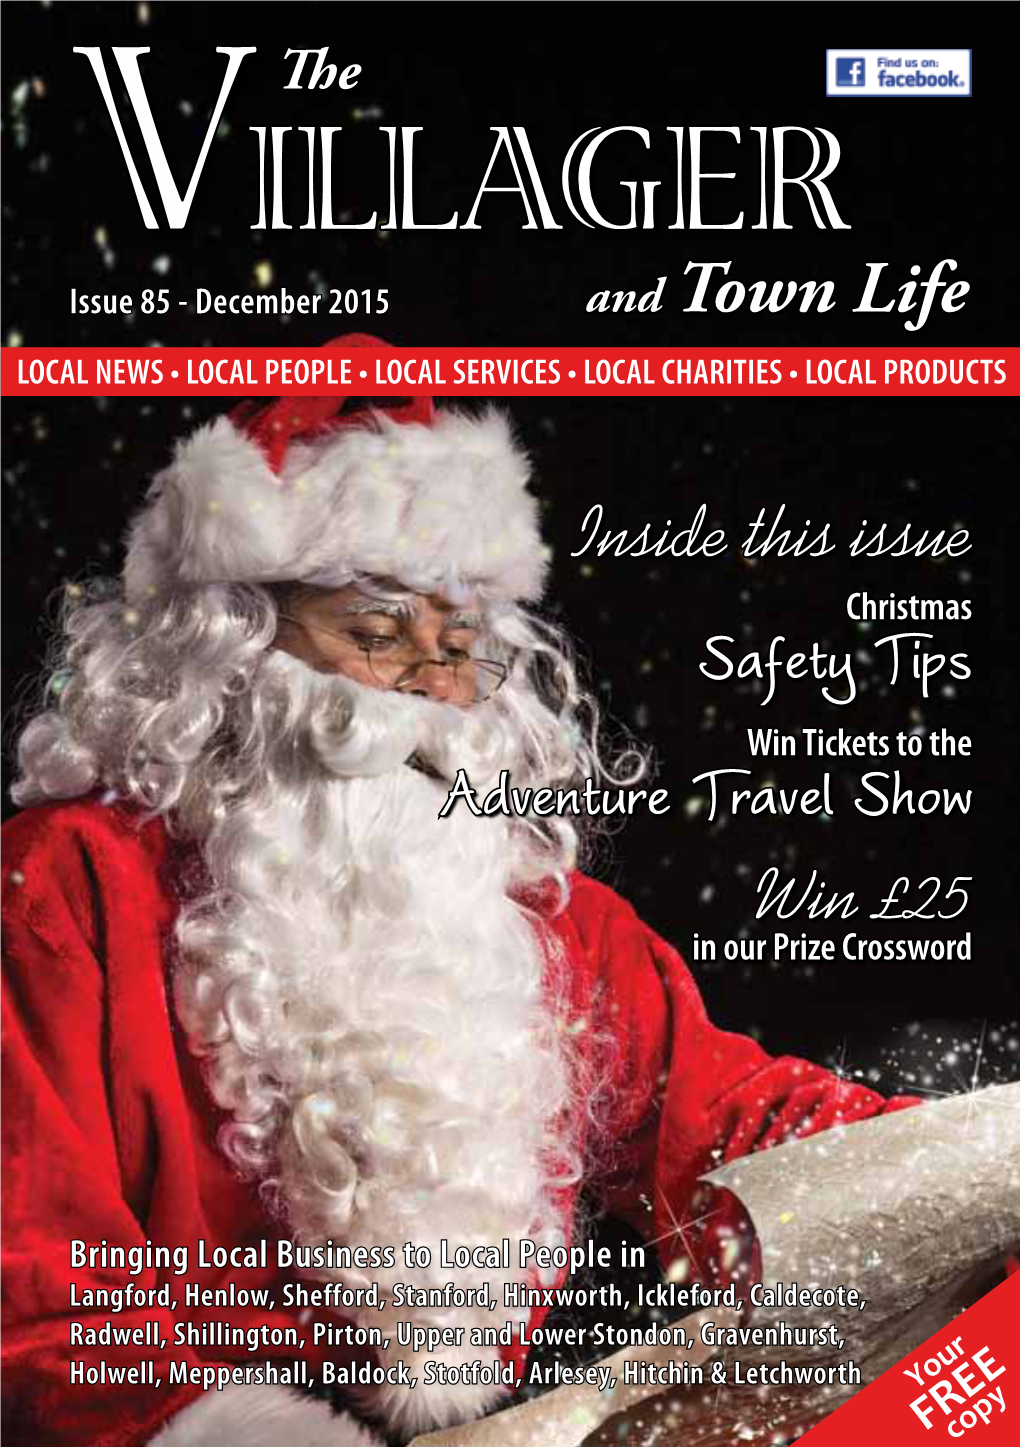 VILLAGER Issue 85 - December 2015 and Town Life LOCAL NEWS • LOCAL PEOPLE • LOCAL SERVICES • LOCAL CHARITIES • LOCAL PRODUCTS